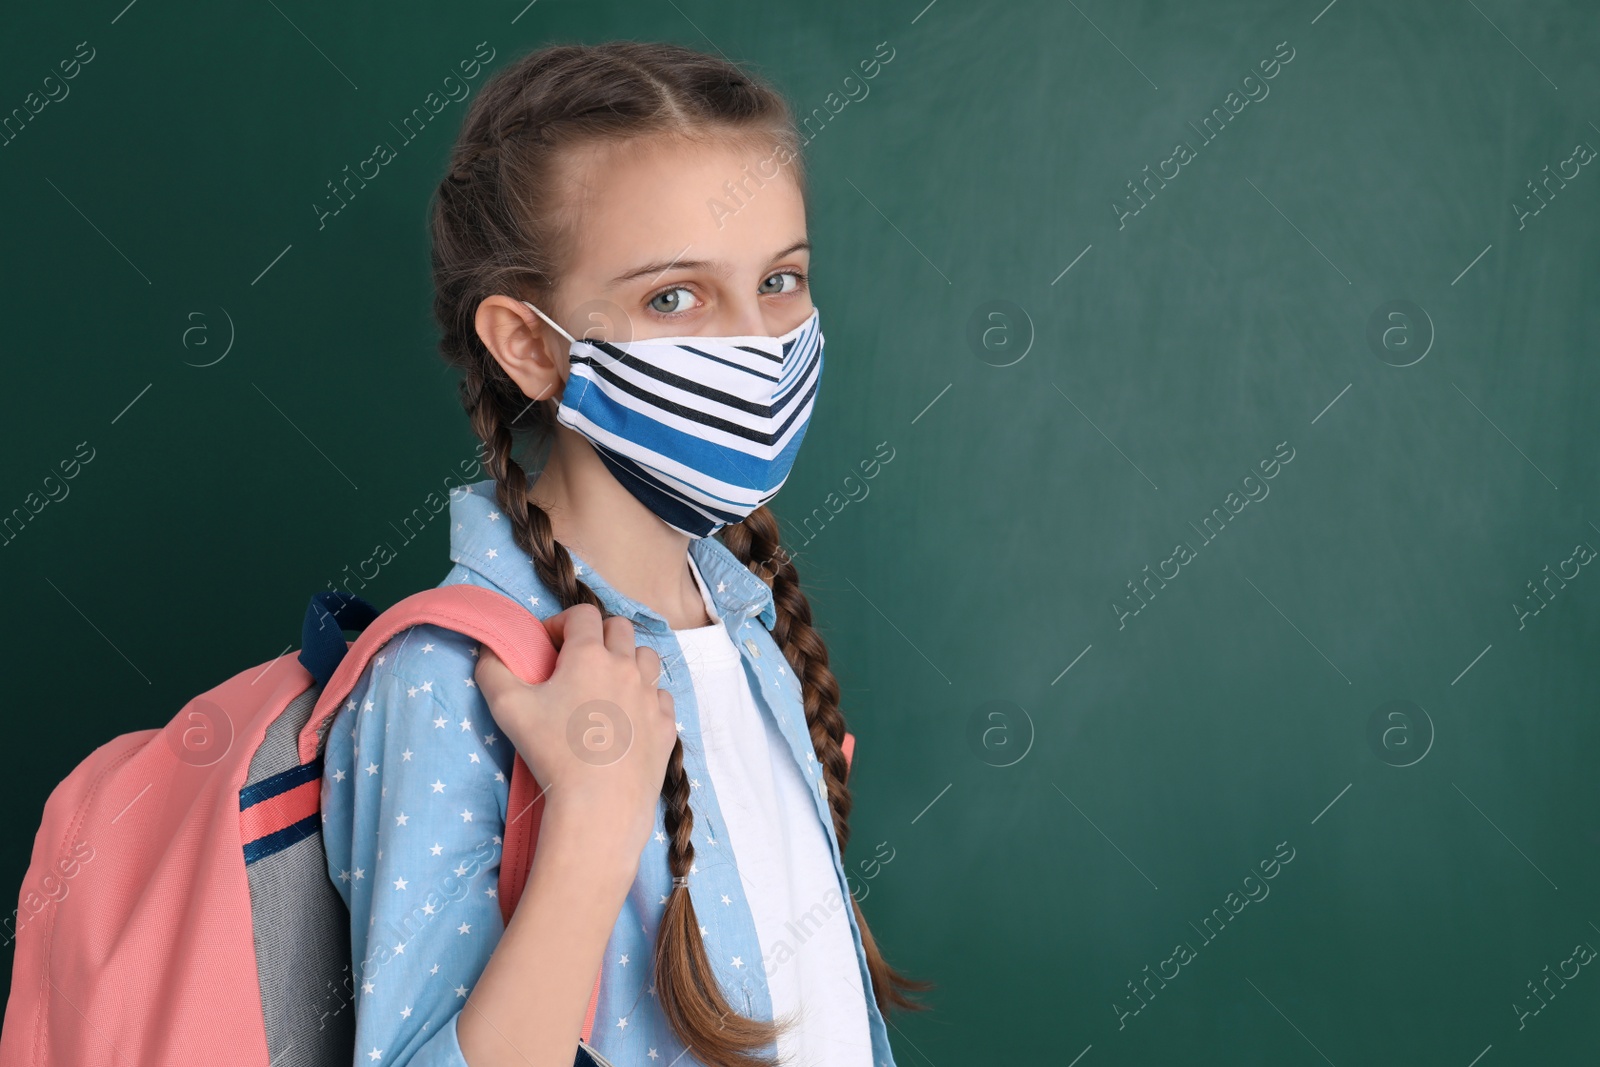 Photo of Schoolgirl wearing protective mask and backpack near green chalkboard, space for text. Child's safety from virus